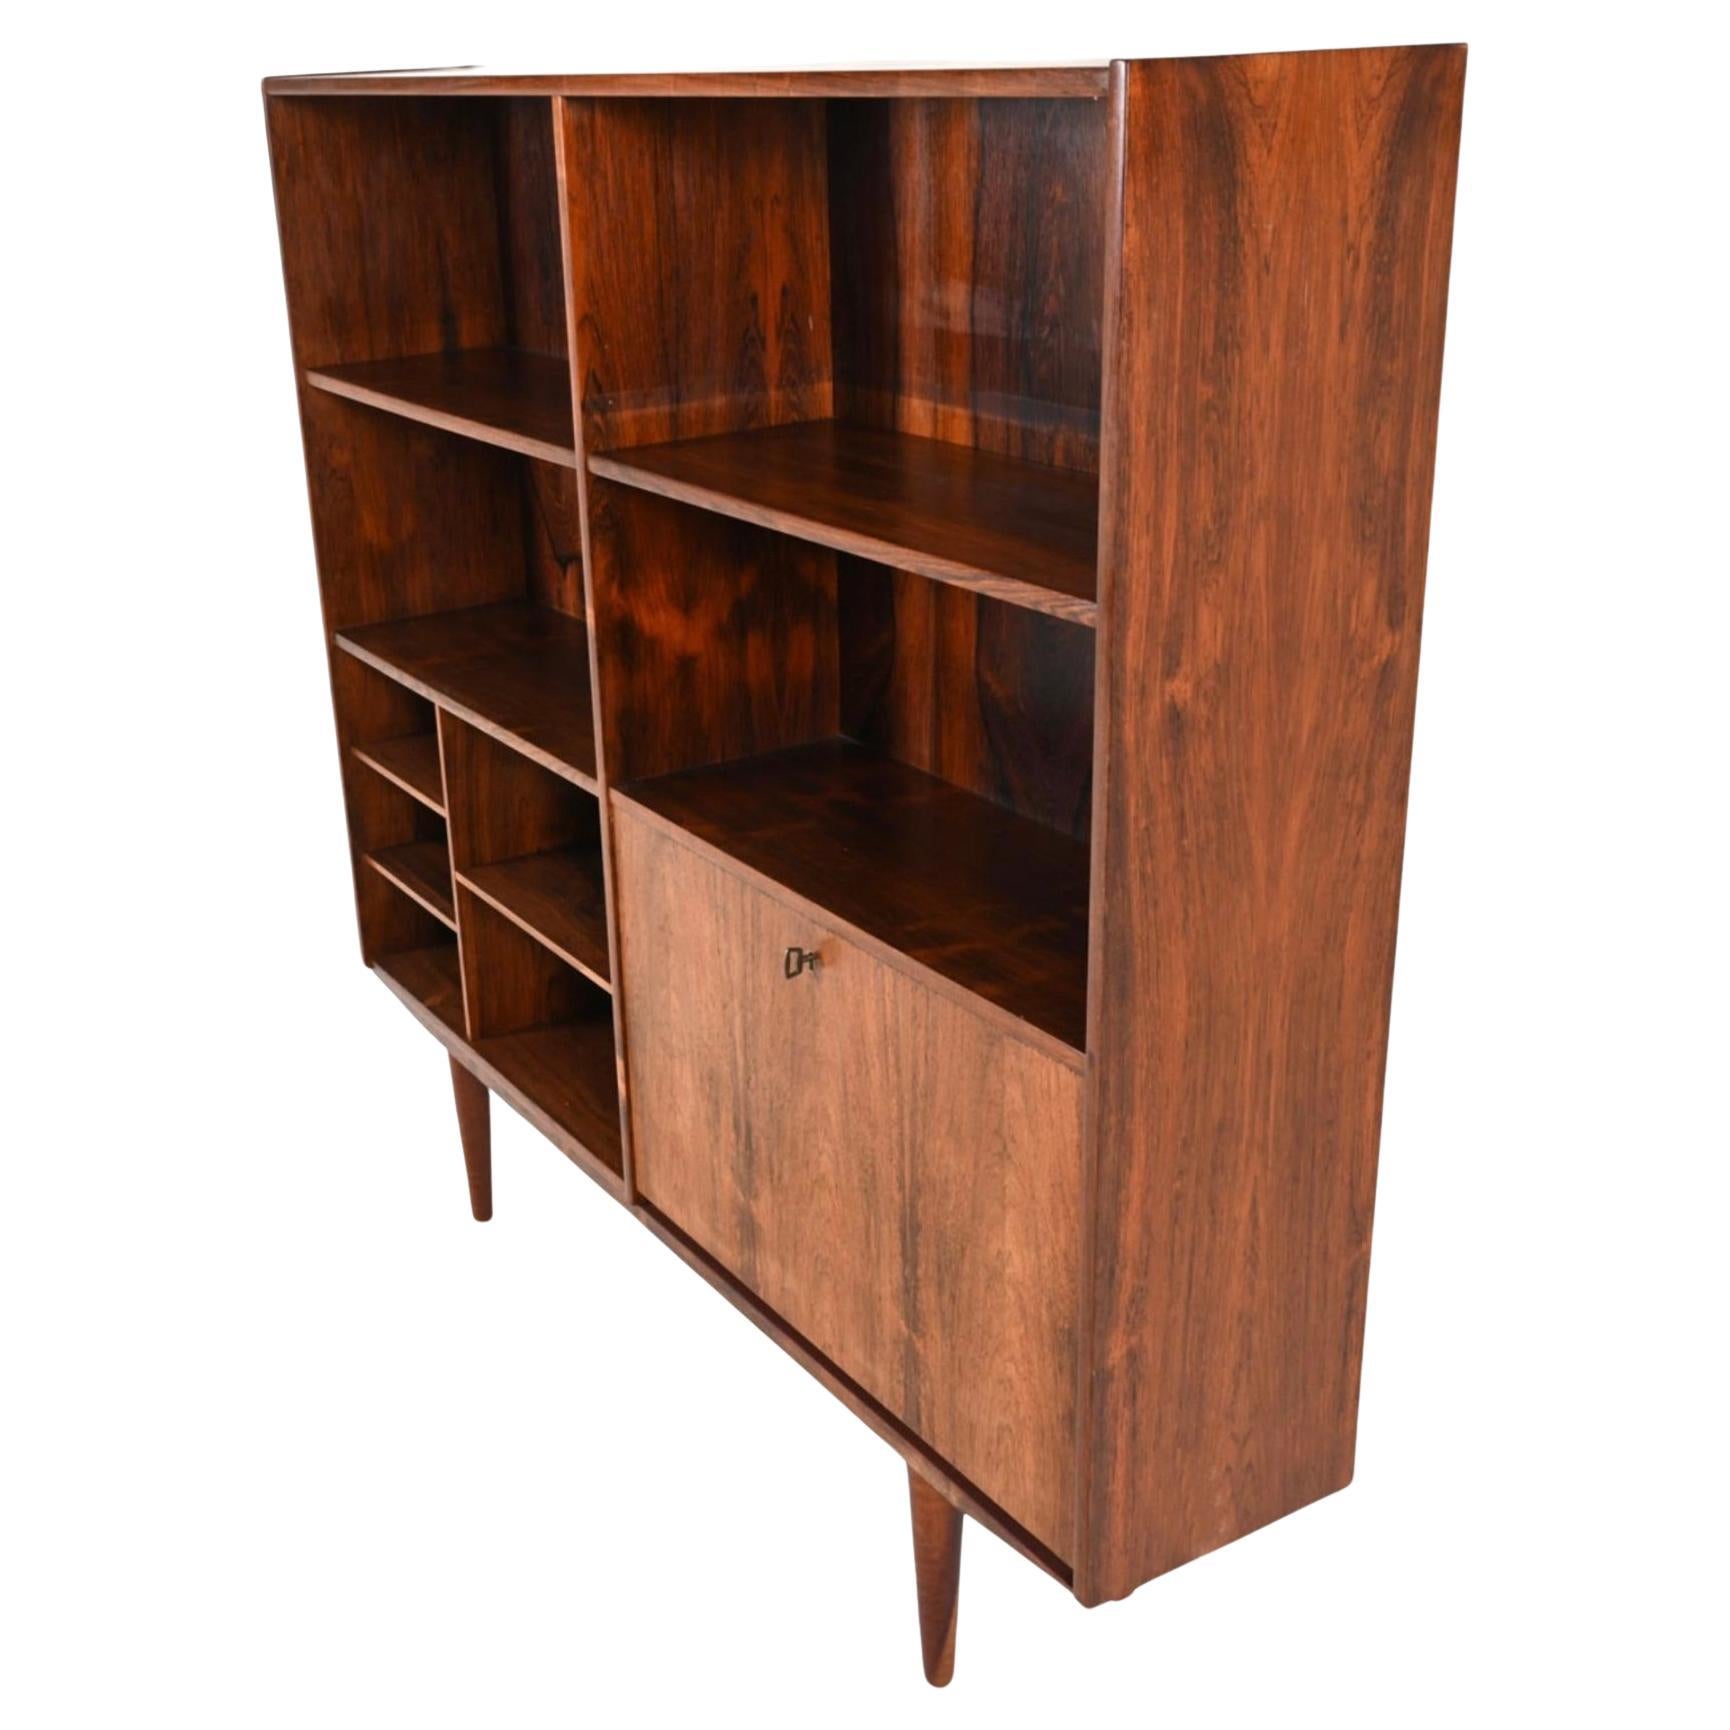 Mid-century Rosewood wood wide and bookcase with 6 adjustable shelves and a lower right locking bar or desk storage area. Beautiful rosewood backing with Slim design and sits on 4 tapered teak legs. Made In Denmark. Has original key. Located in